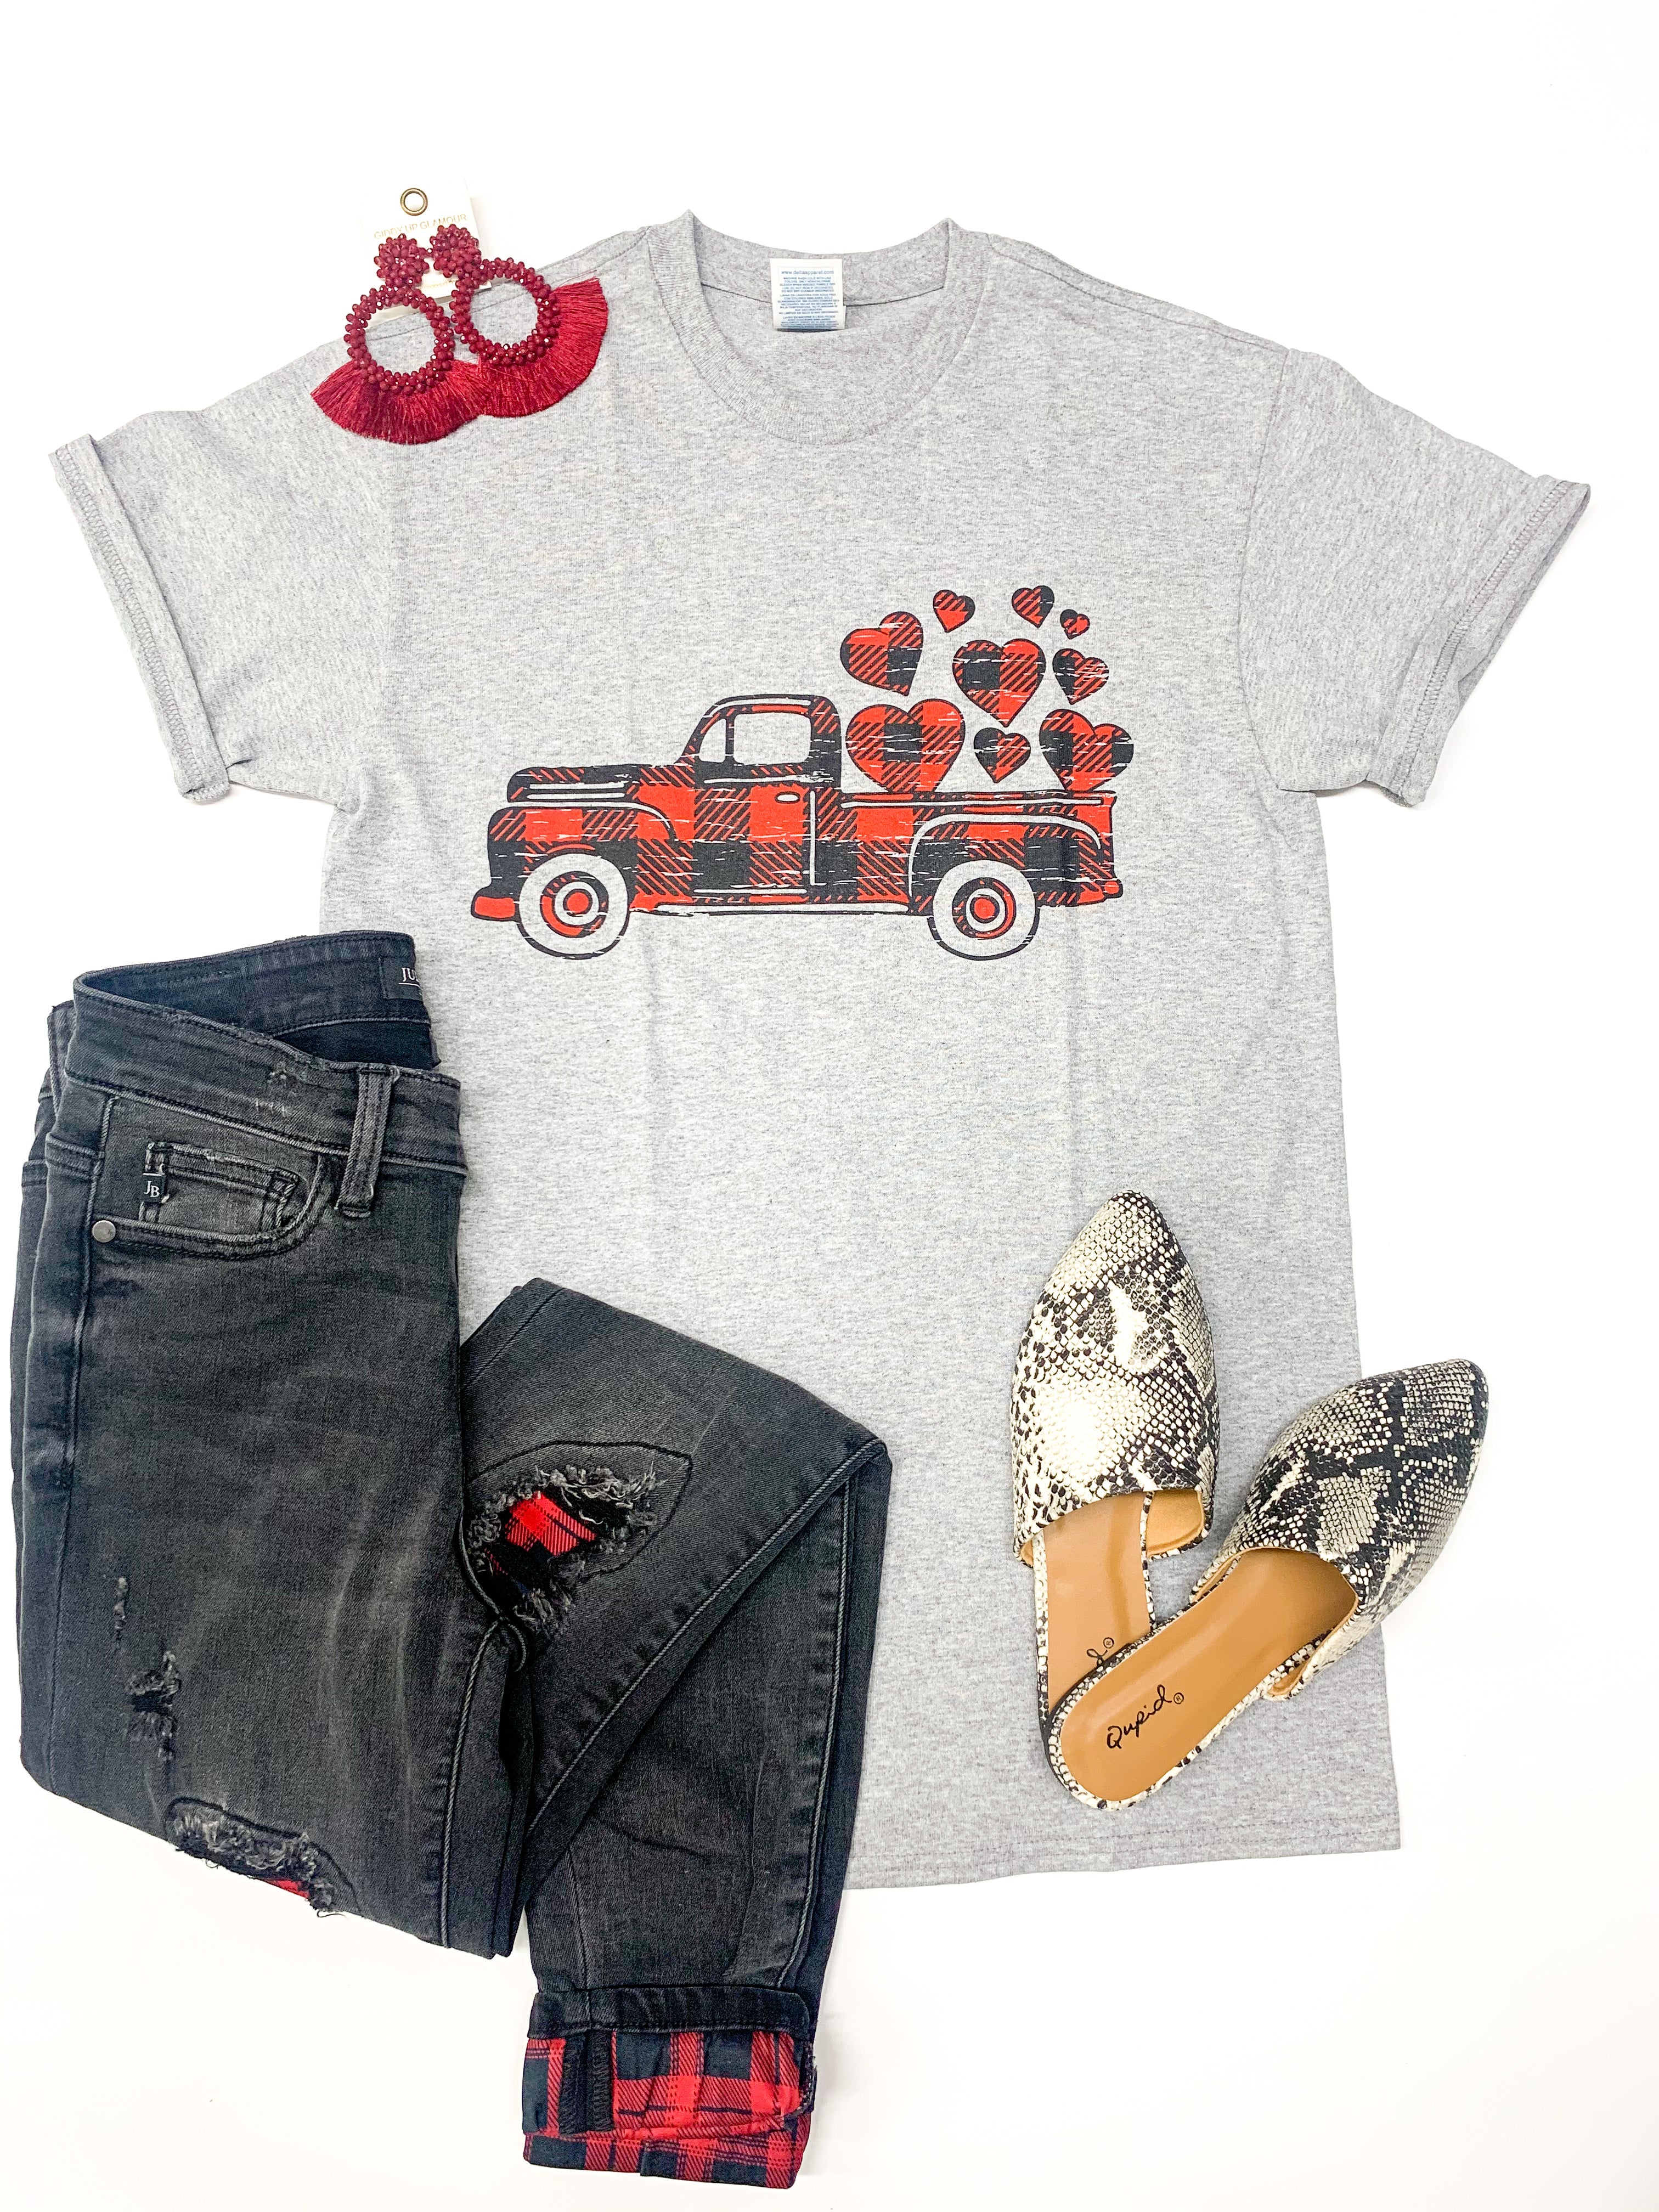 Take My Love For A Ride Buffalo Plaid Pickup Truck with Hearts Graphic Tee in Grey - Giddy Up Glamour Boutique